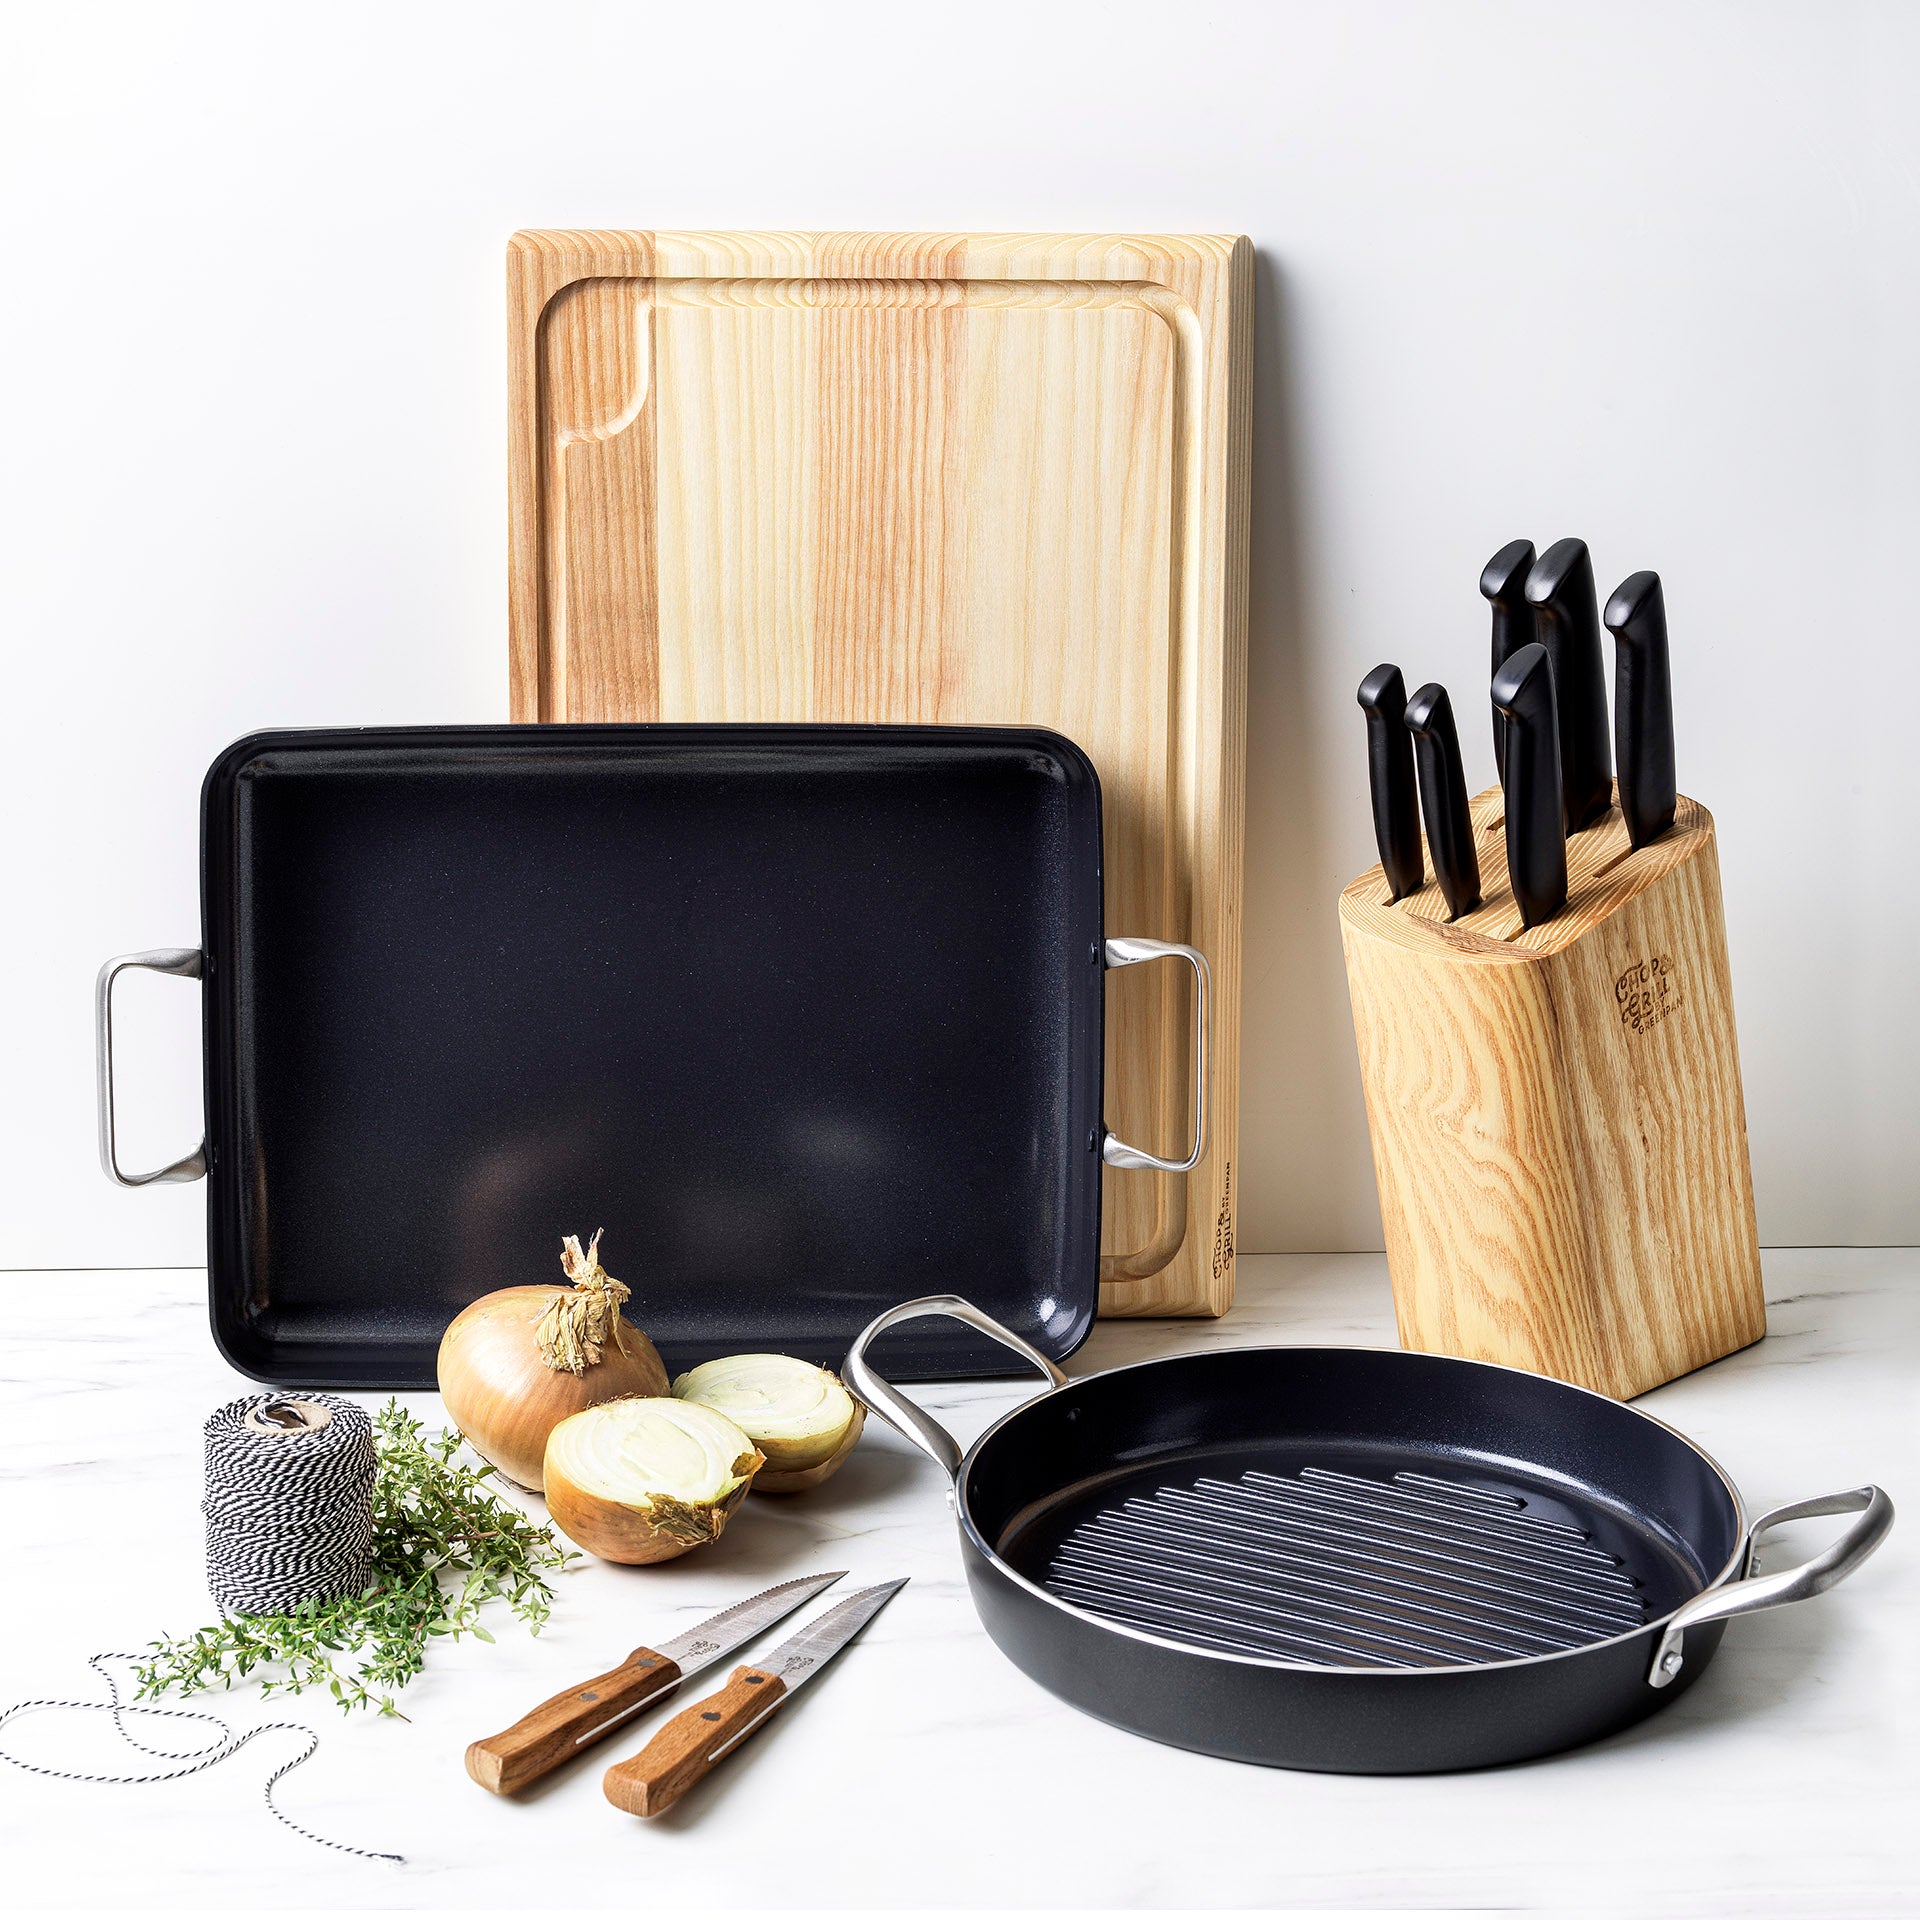 Chop & Grill Snijplank hout collectie